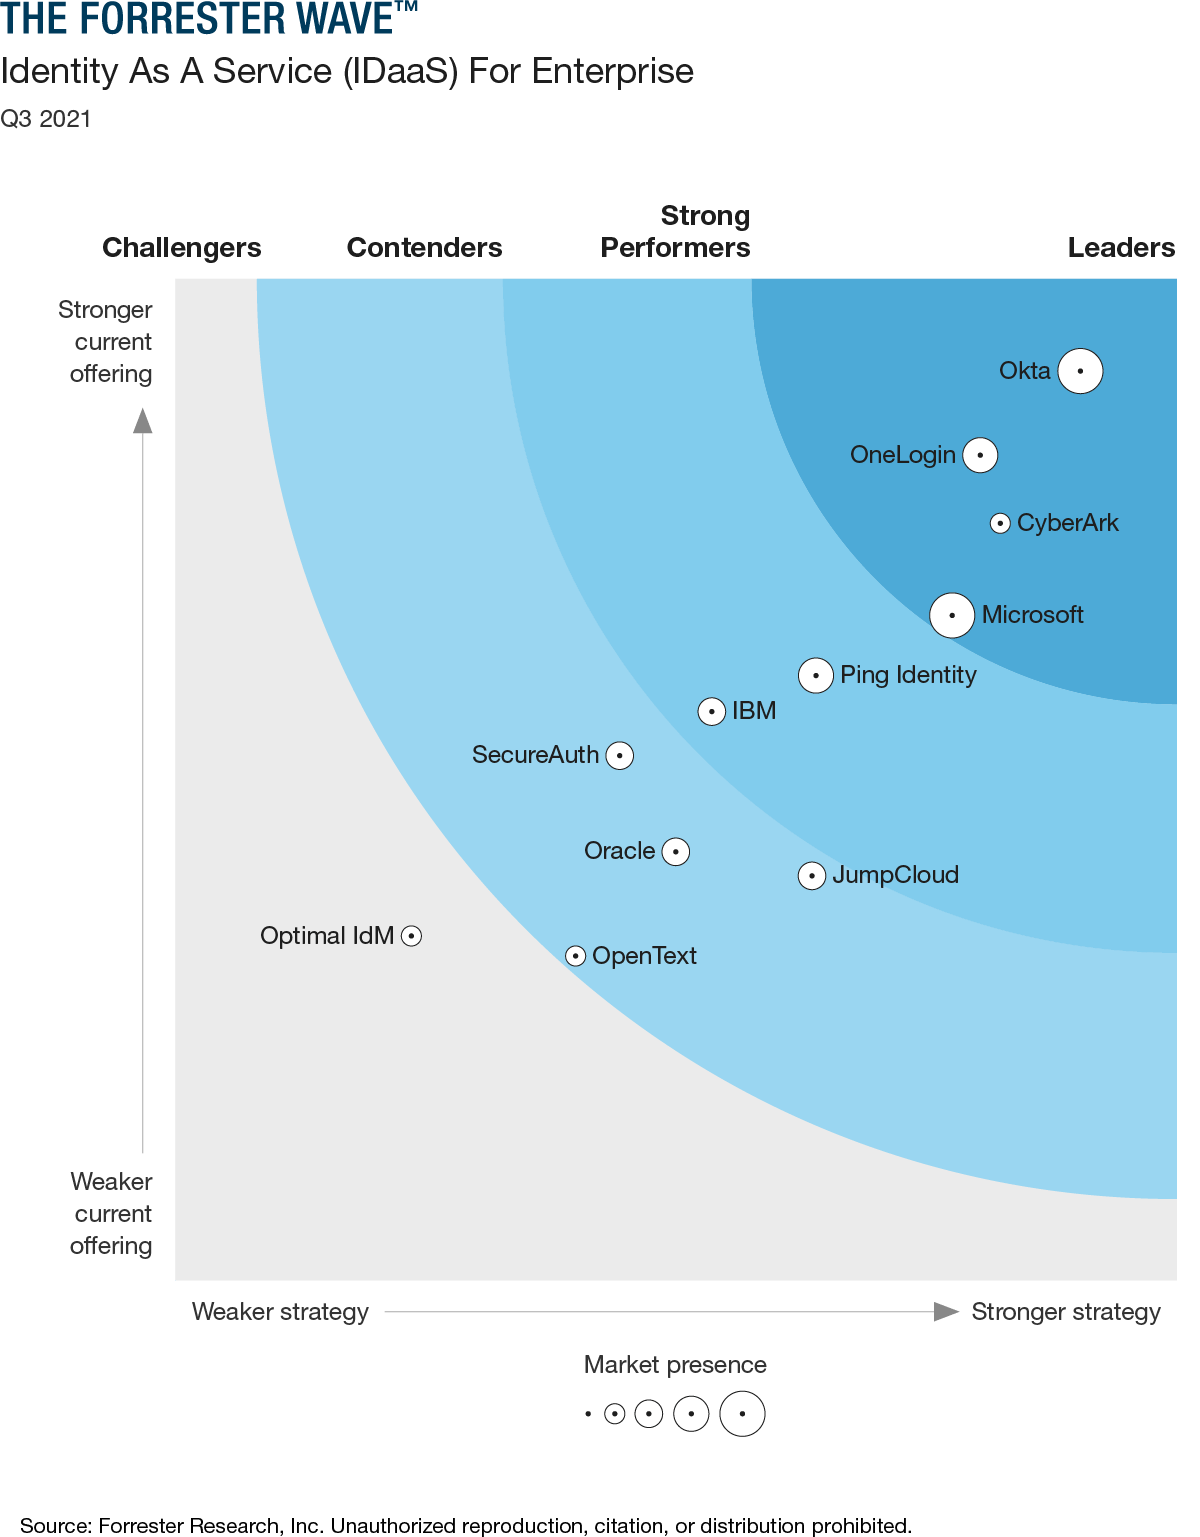 The Forrester Wave (TM): Identity as a Service For Enterprise, Q3 2021